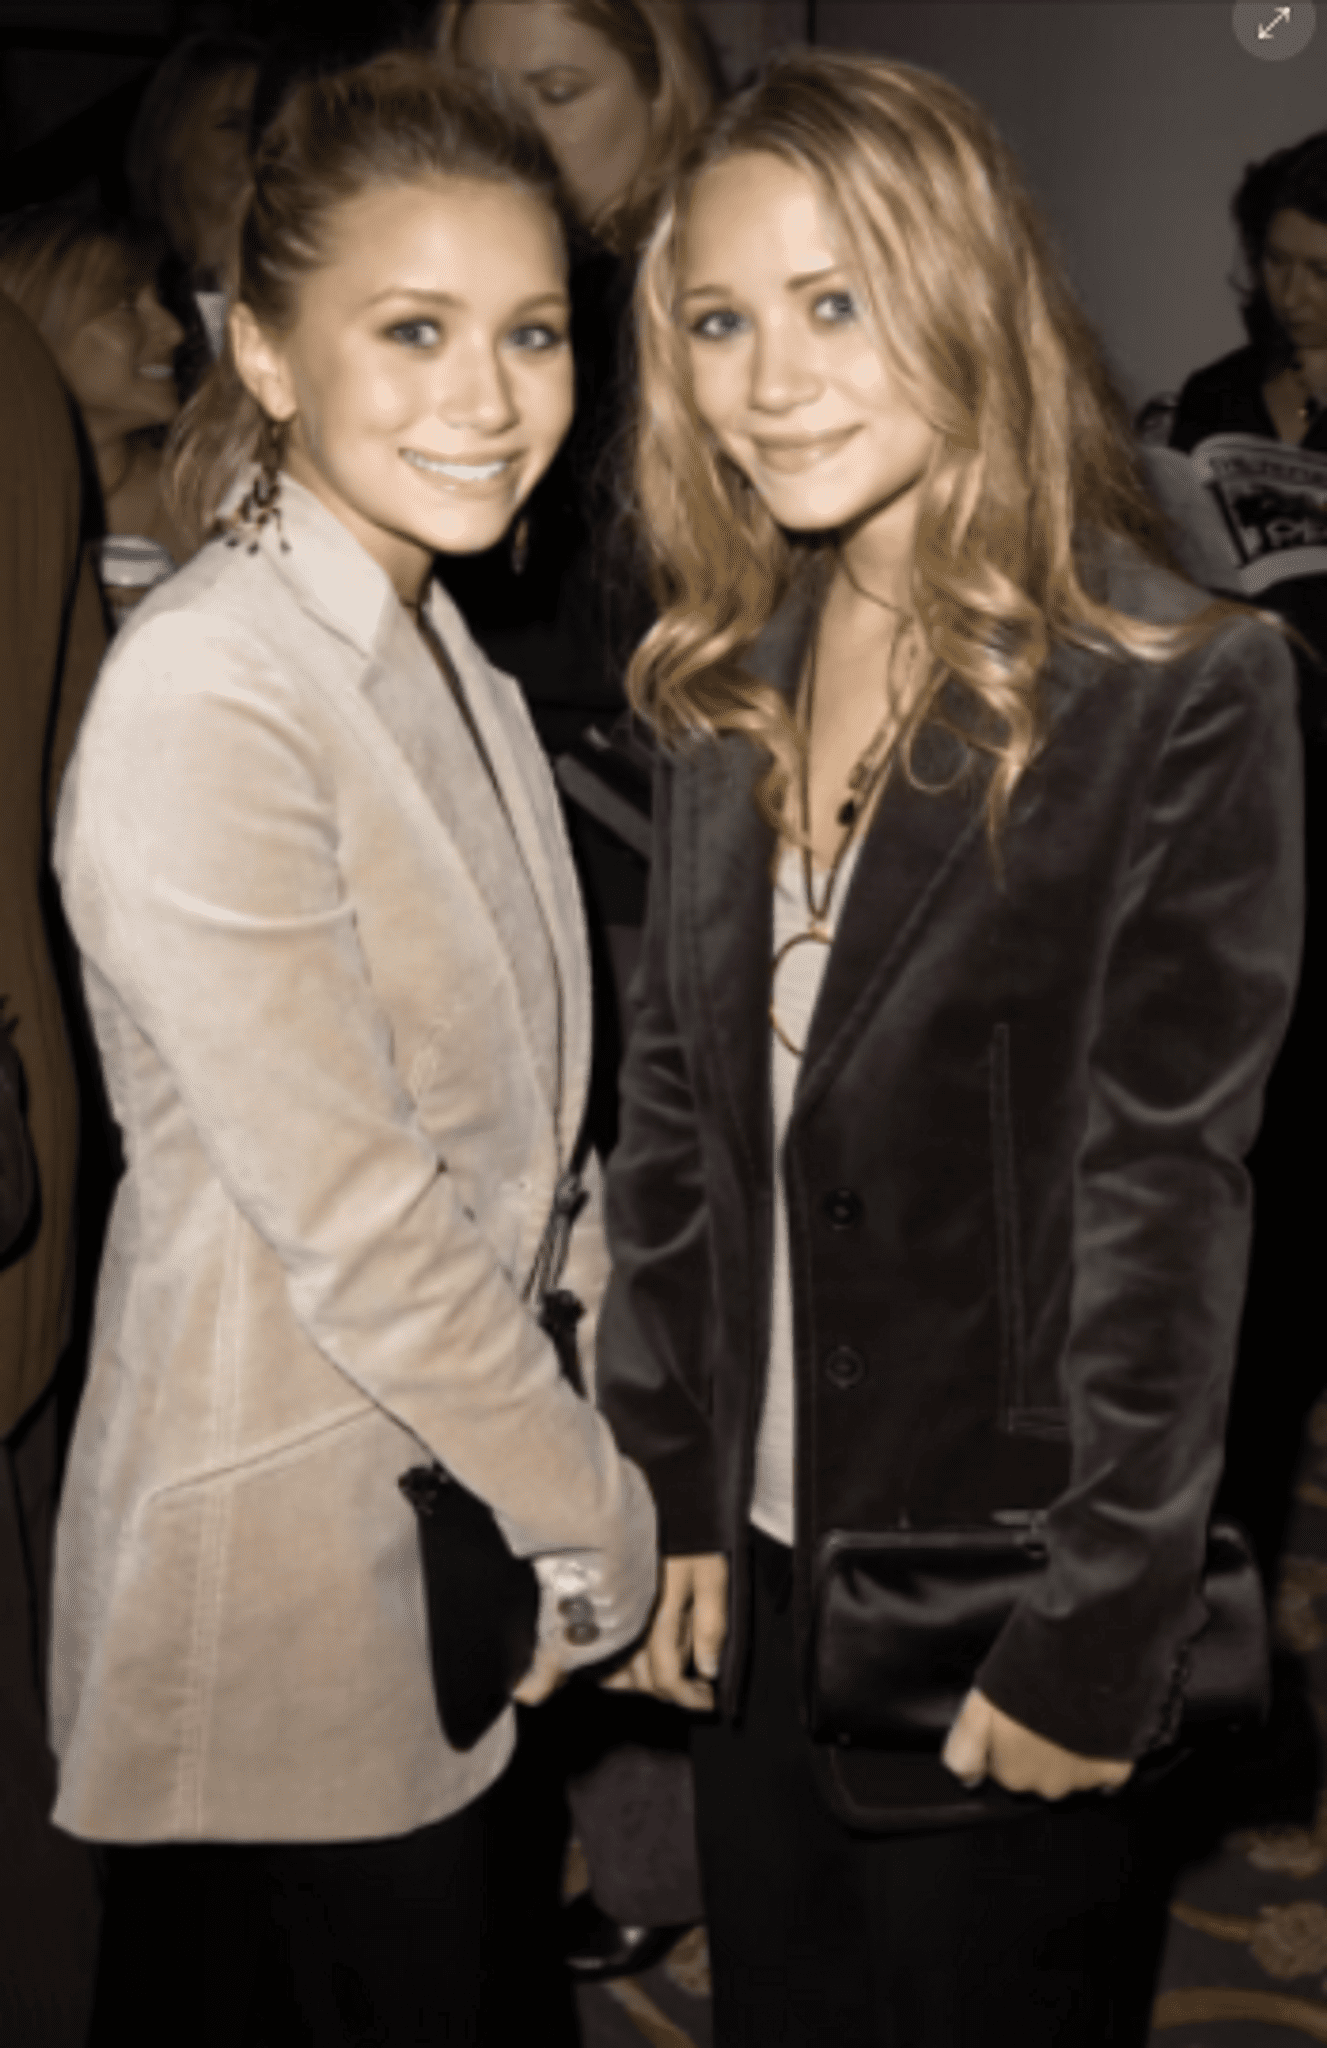 The Olsen sister's style: the six most important elements of a celebrity wardrobe